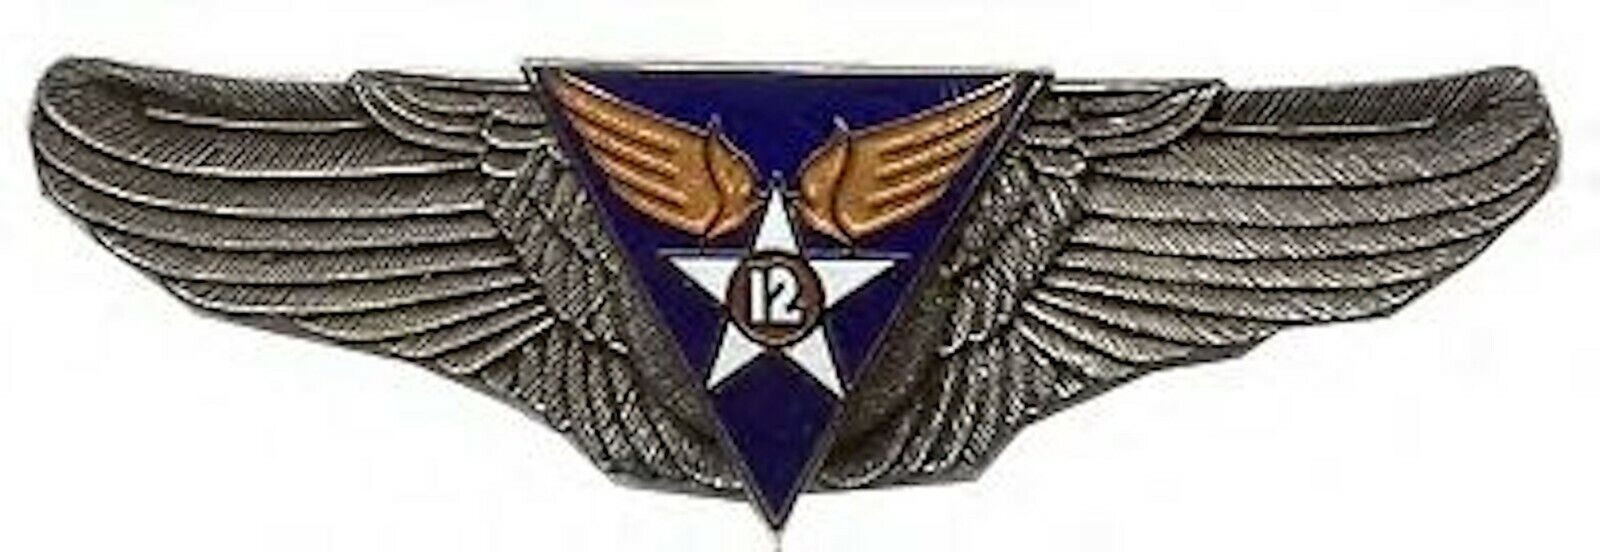 12TH AIR CORPS FORCE  USAF BIG PEWTER WING PIN 